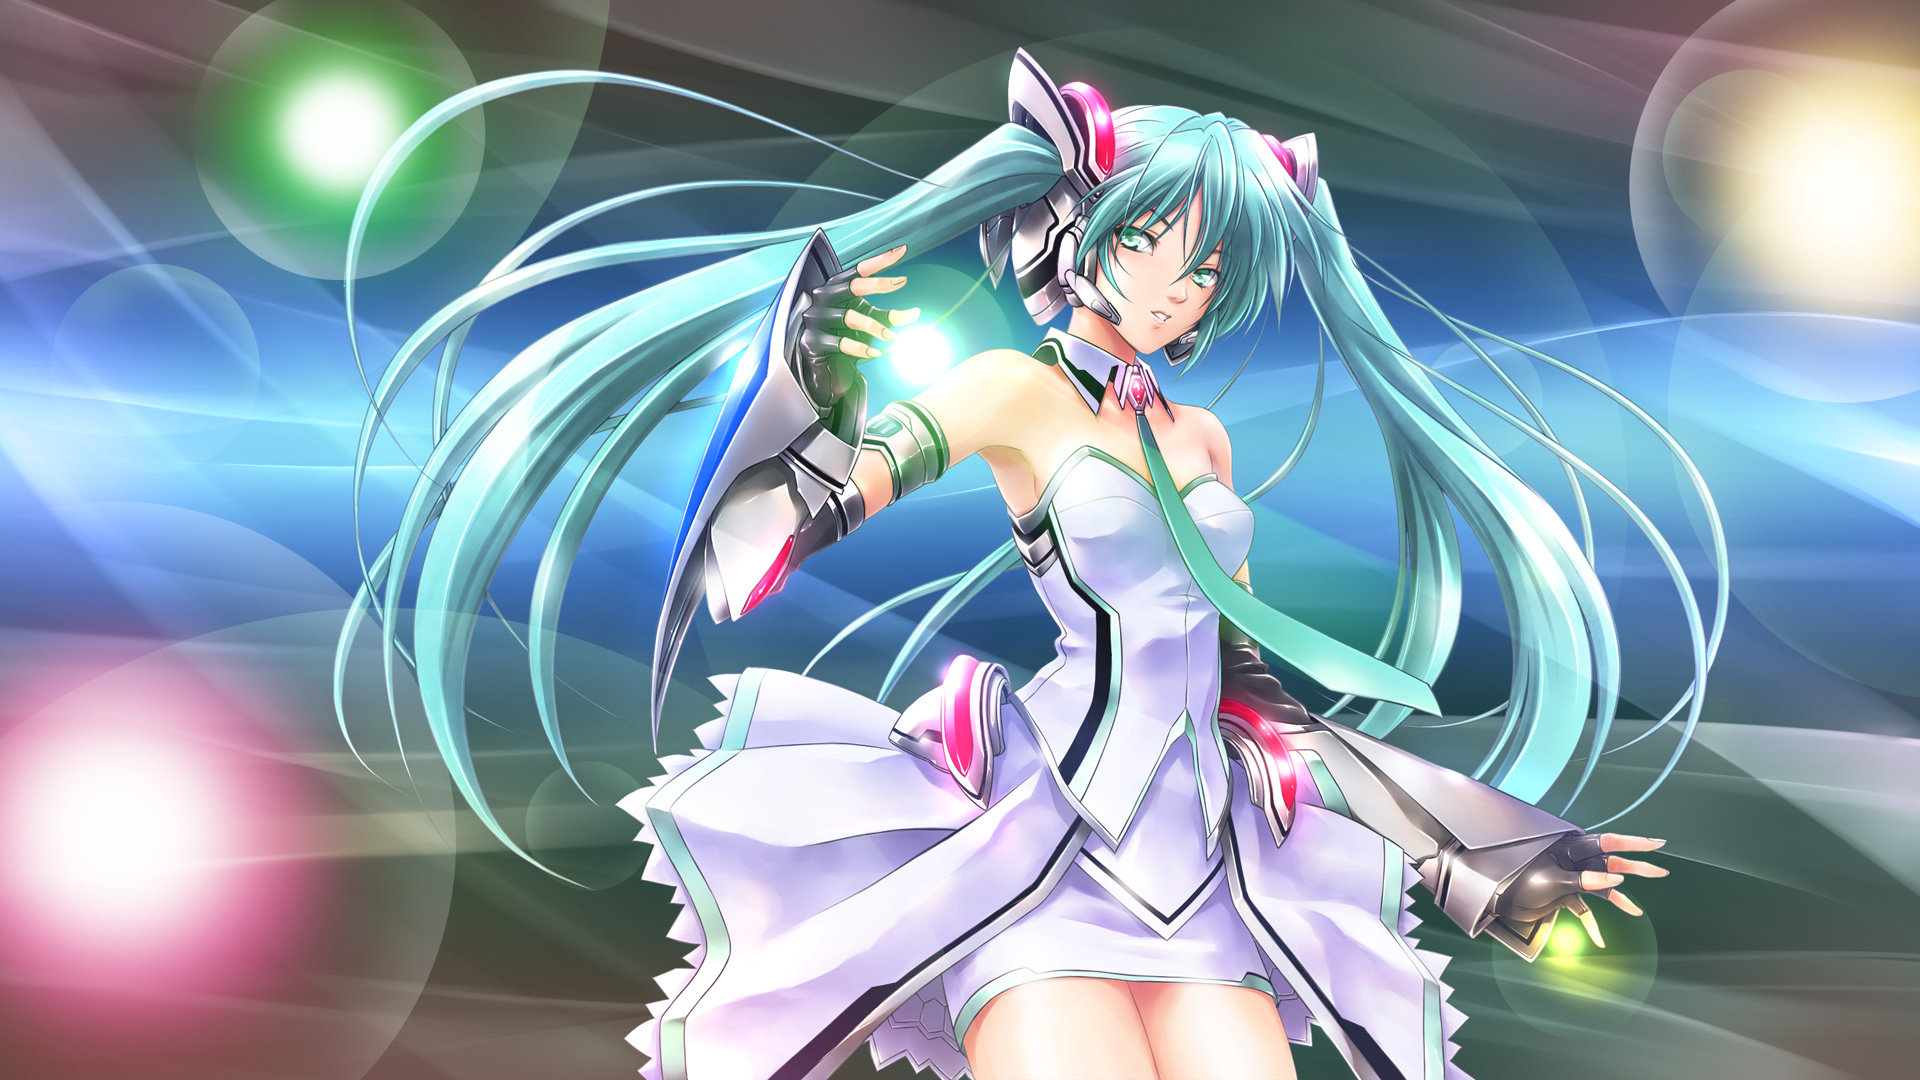 Download hd 1920x1080 Vocaloid computer wallpaper ID:6730 for free